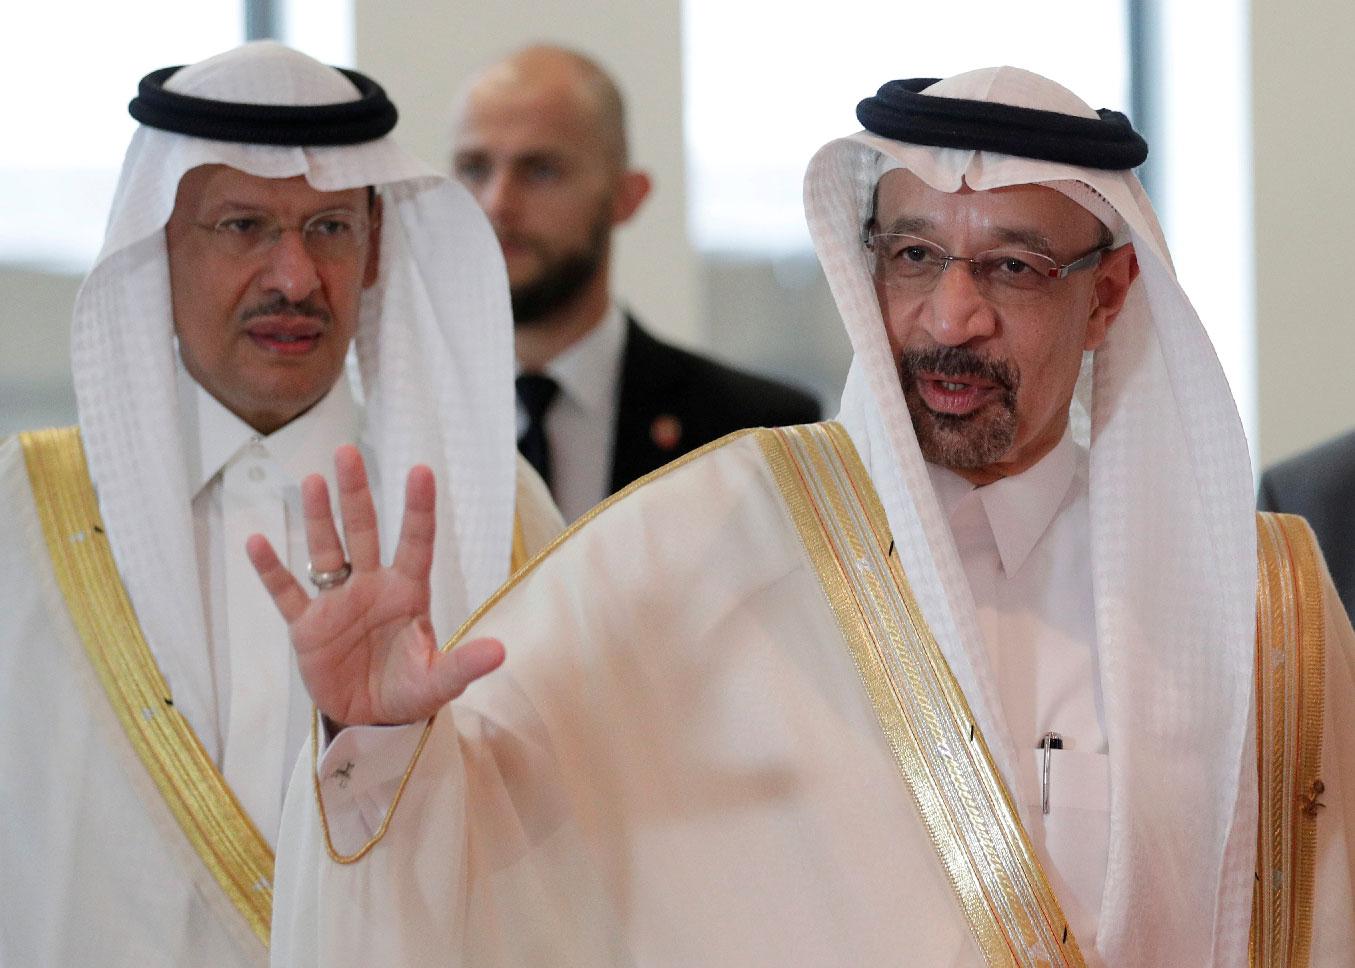 Al-Falih said he was guided by oil market fundamentals, not prices